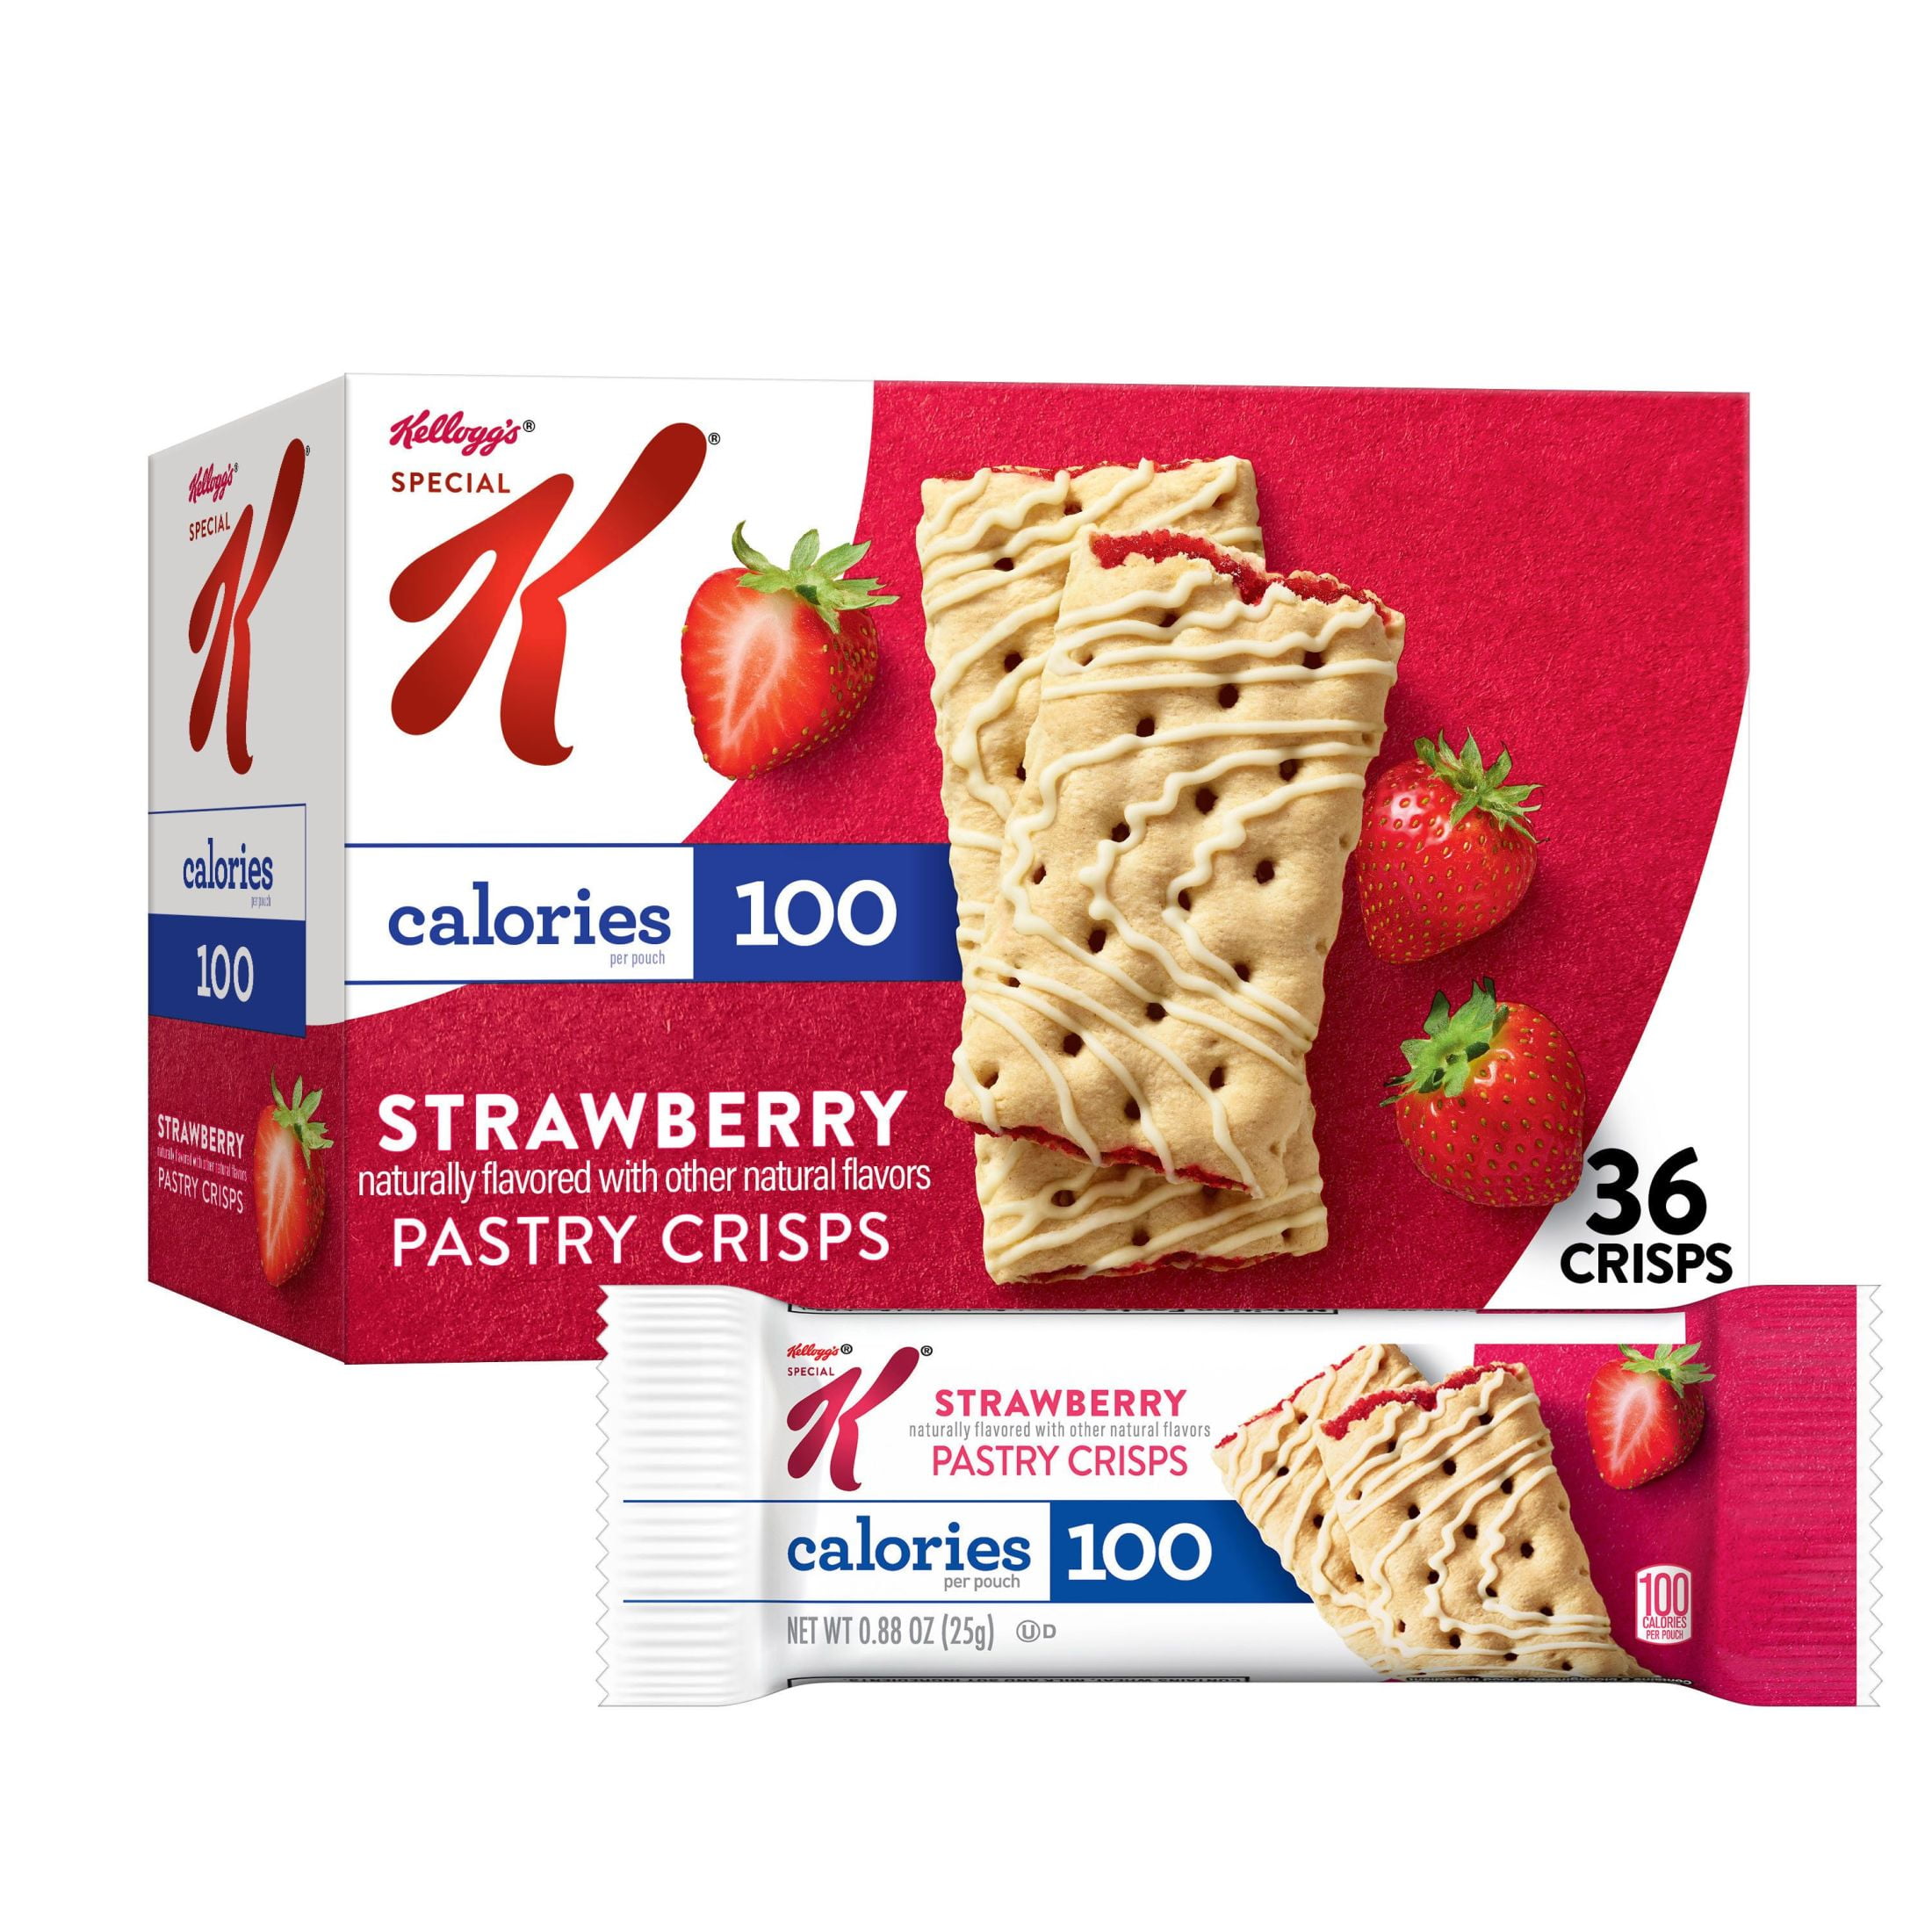 Kellogg's Special K Strawberry Chewy Pastry Crisps, 15.84 oz, 36 Count